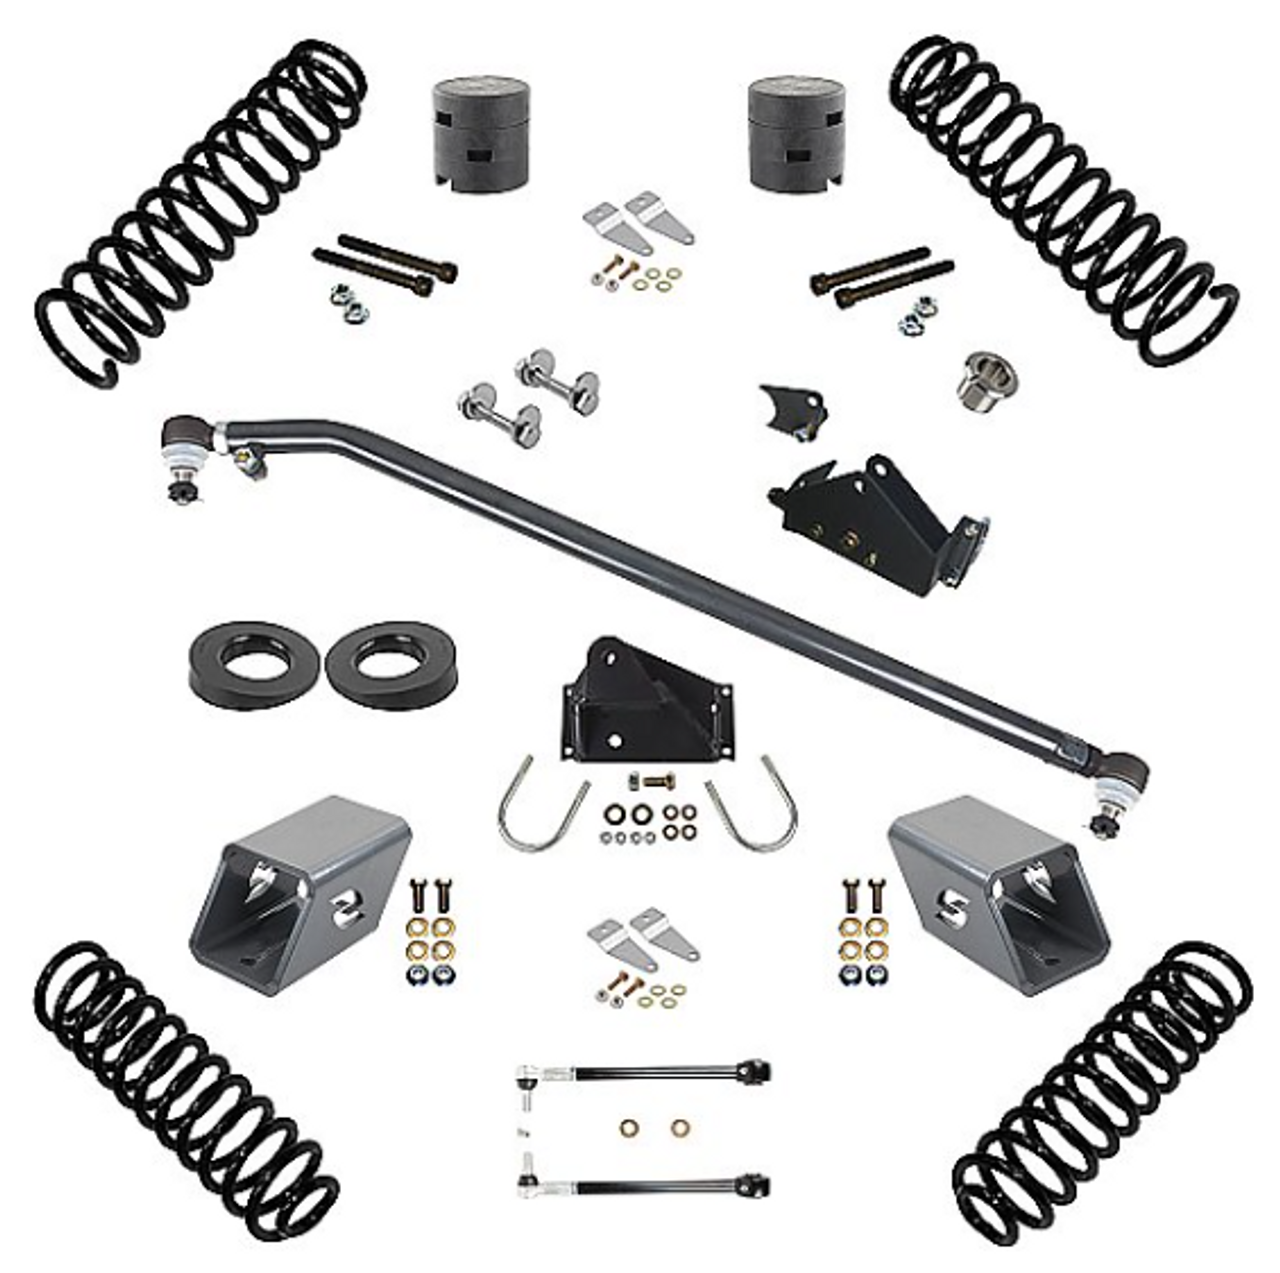 Synergy 8045-30 Stage 1.5 Suspension System 3" Lift for Jeep Wrangler JK 4 Door 2007-2018